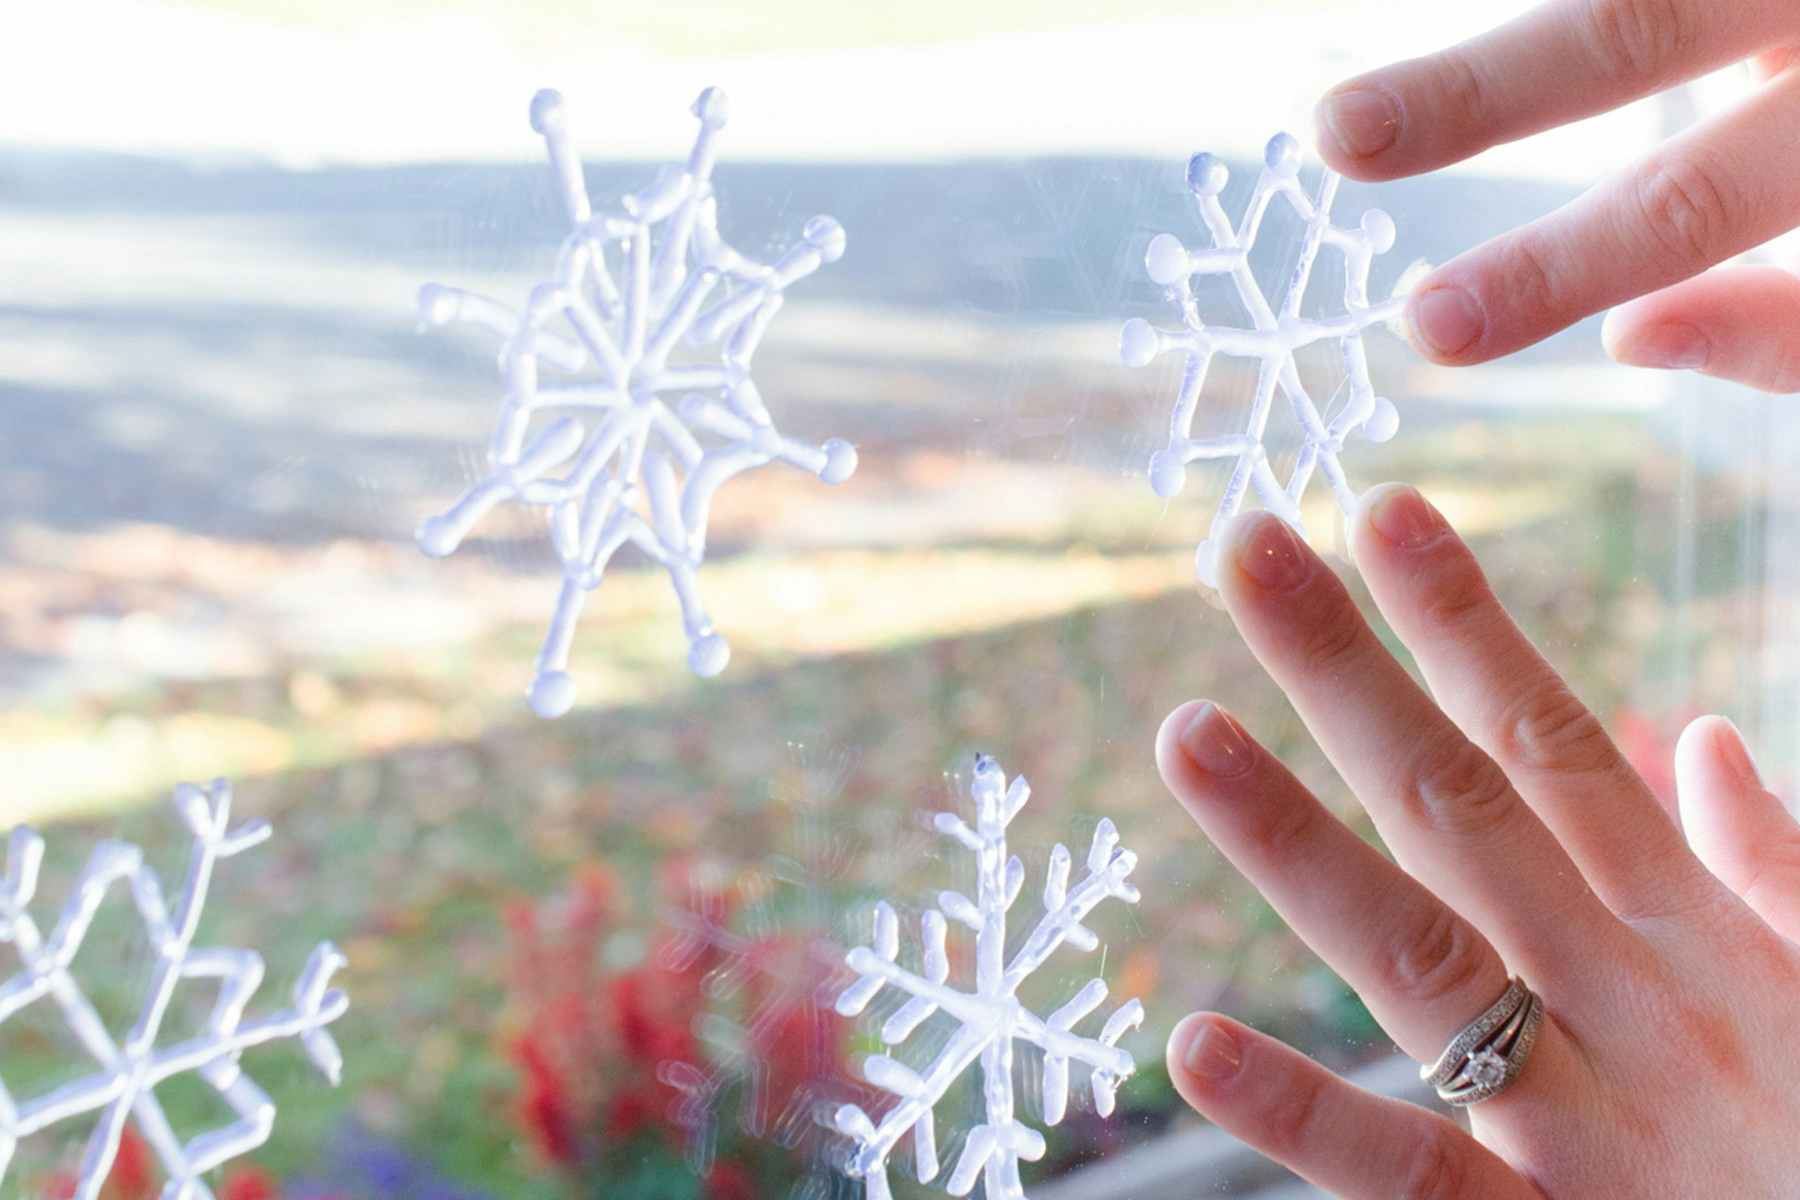 Hot glue snowflakes being attached to a window.